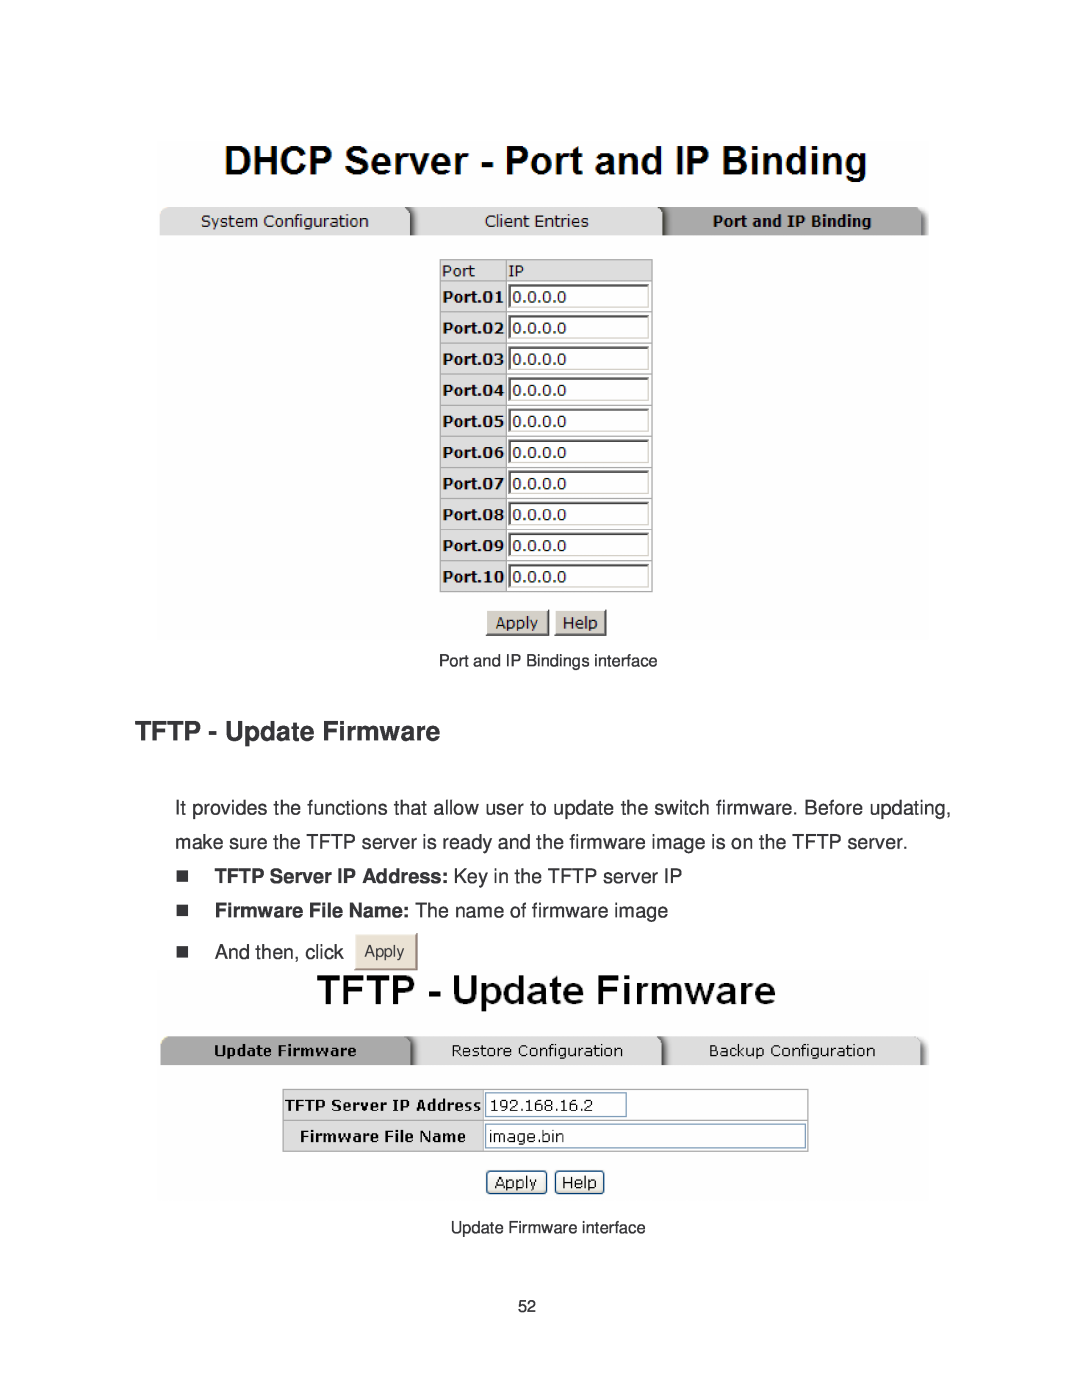 Transition Networks TFTP - Update Firmware, TFTP Server IP Address Key in the TFTP server IP, And then, click, Apply 